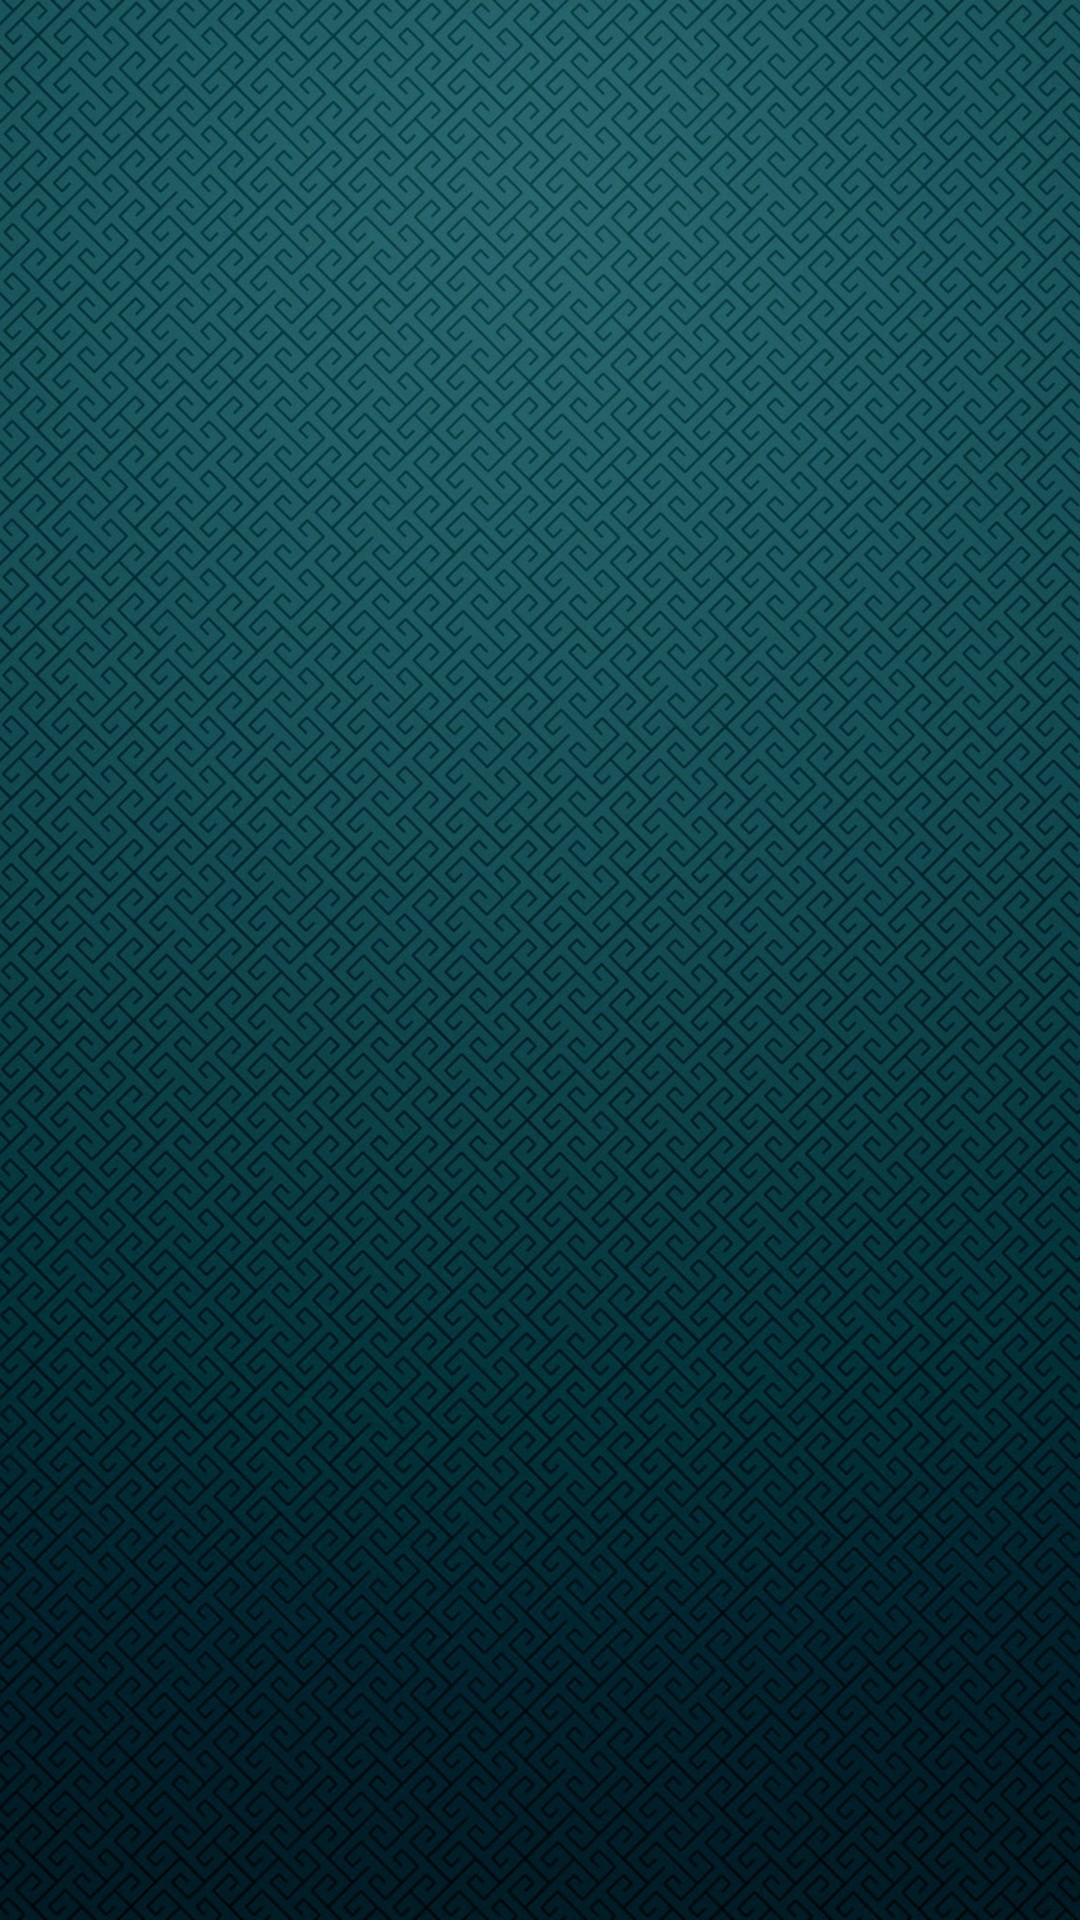 Teal Green Wallpaper For Android with resolution 1080X1920 pixel. You can make this wallpaper for your Android backgrounds, Tablet, Smartphones Screensavers and Mobile Phone Lock Screen